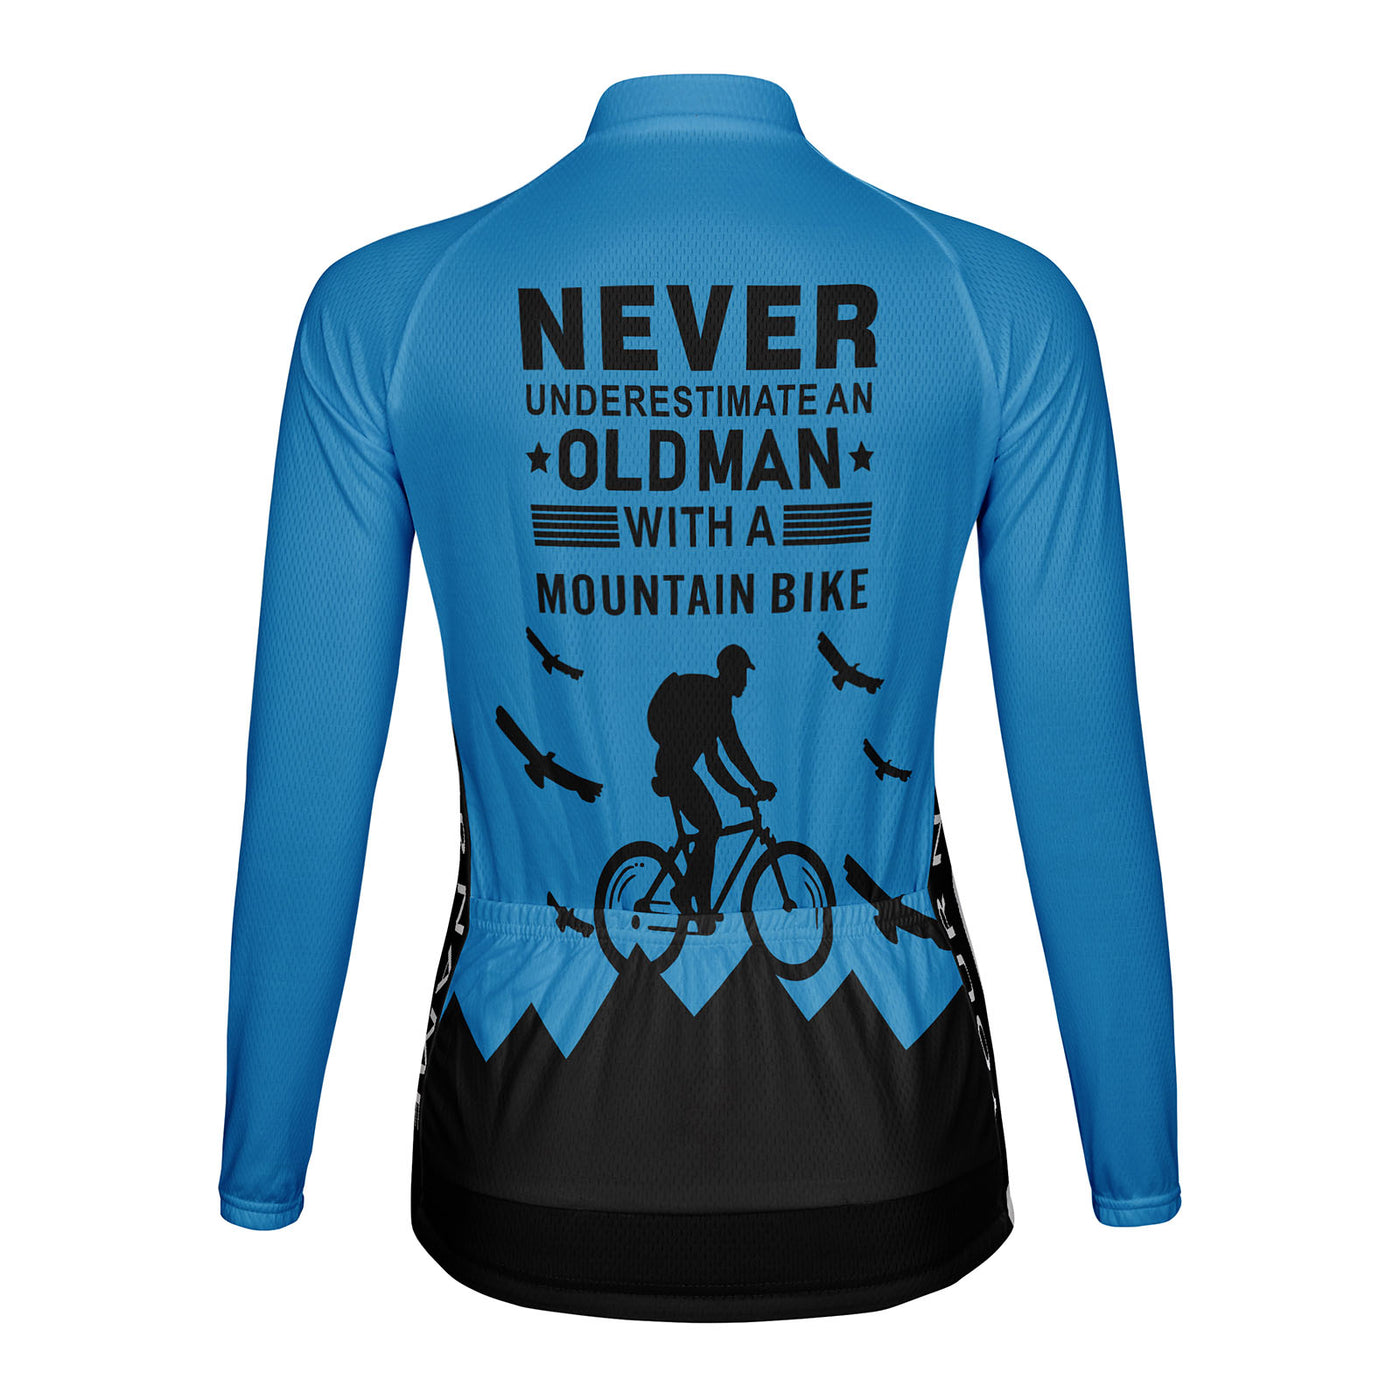 Customized Old Man with A Mountain Bike Women's Thermal Fleece Cycling Jersey Long Sleeve